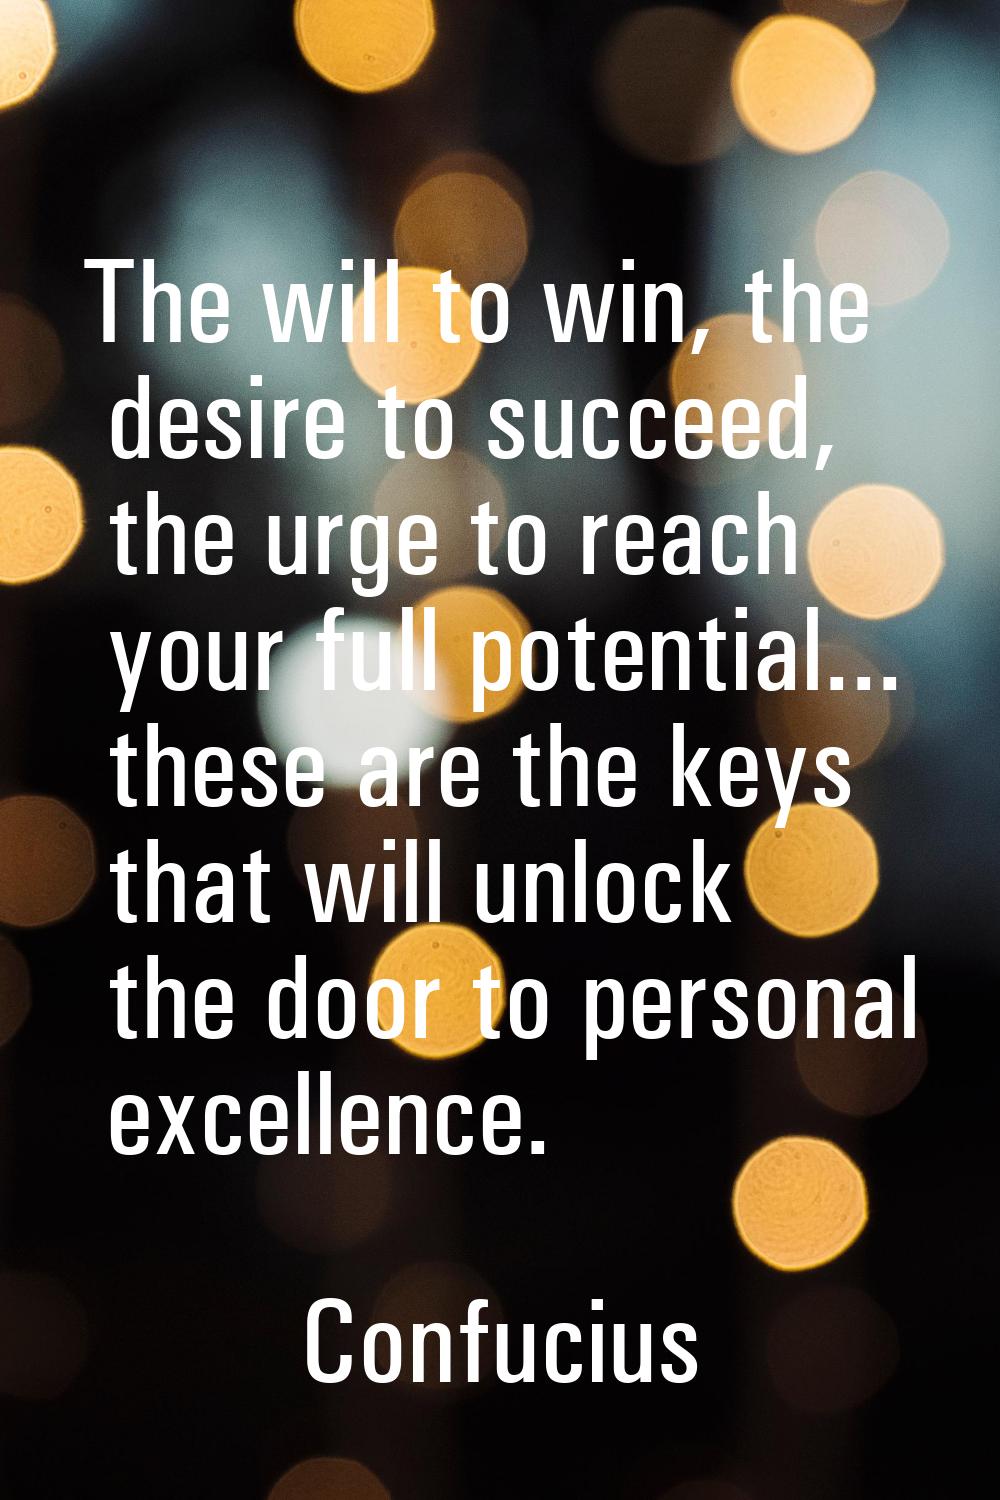 The will to win, the desire to succeed, the urge to reach your full potential... these are the keys